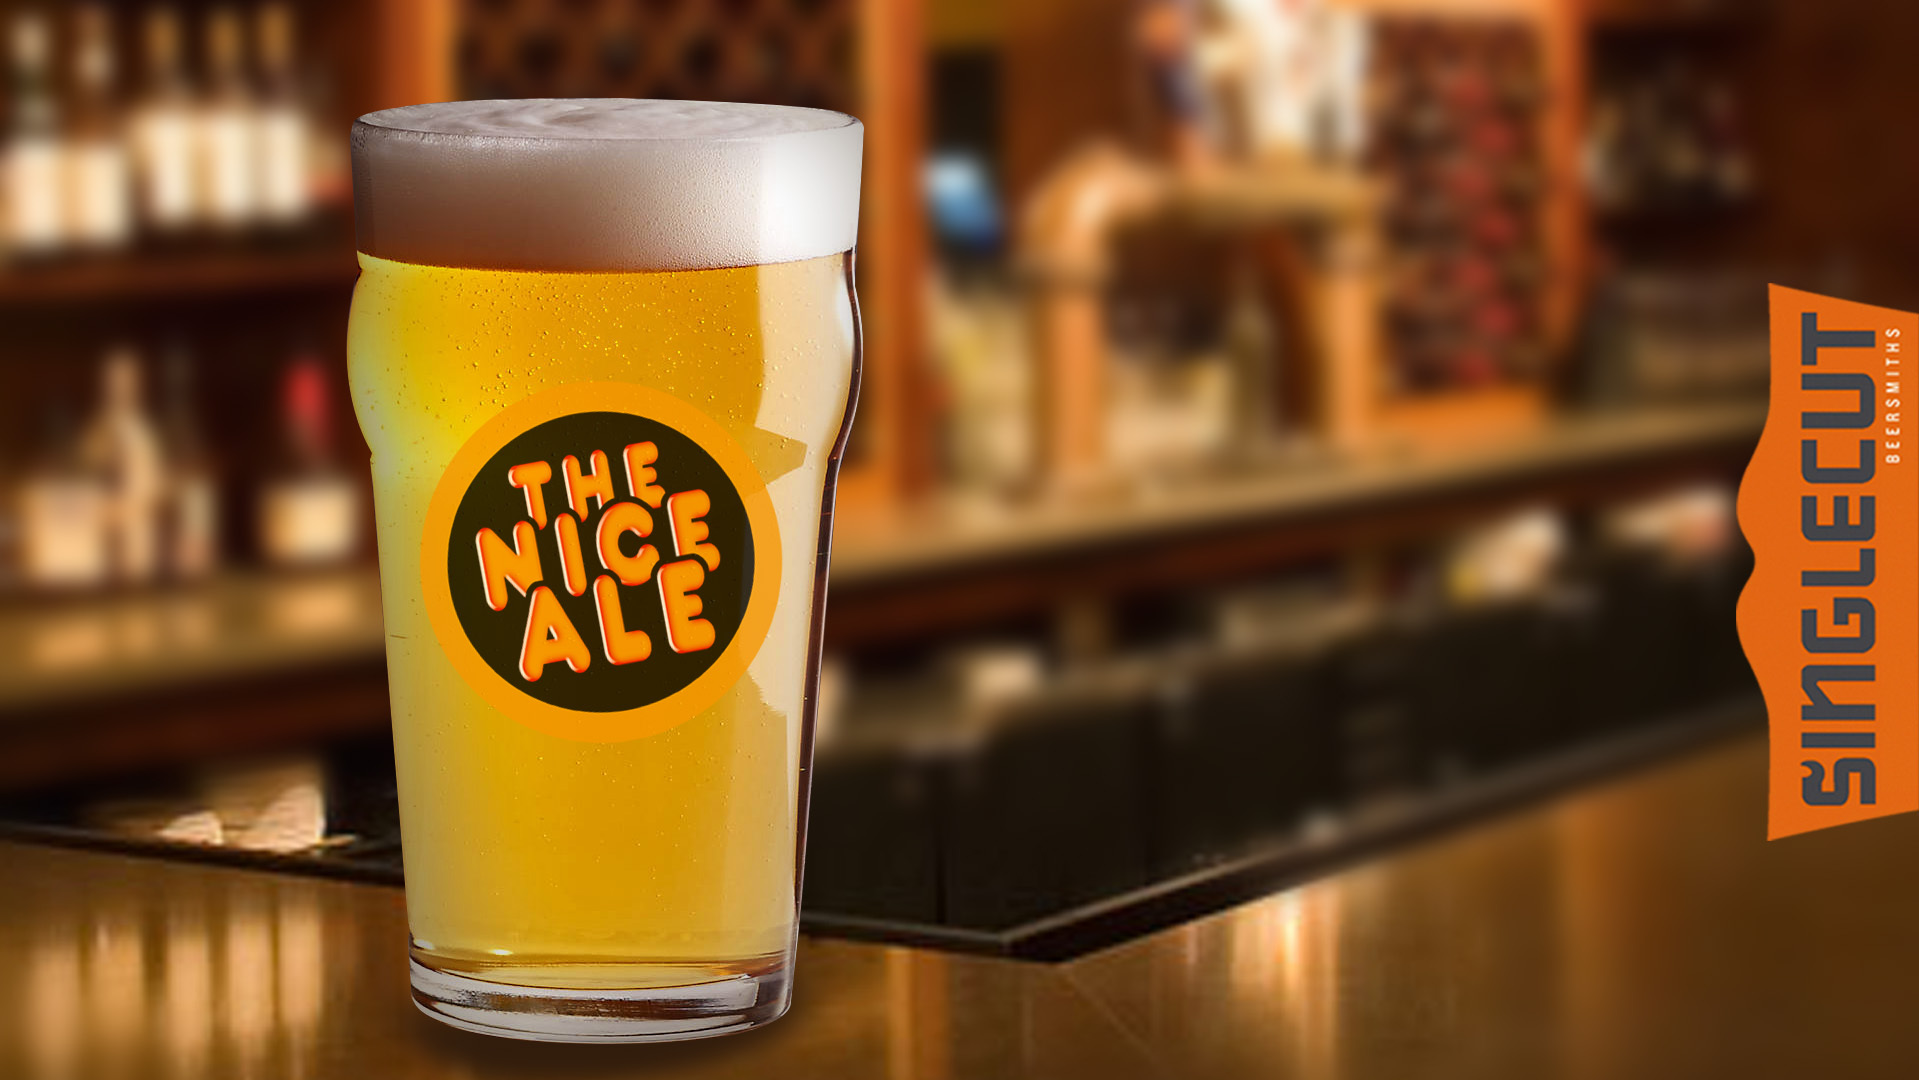 Full pint glass sitting on a brown bar top with a circular logo that says "The Nice Ale"